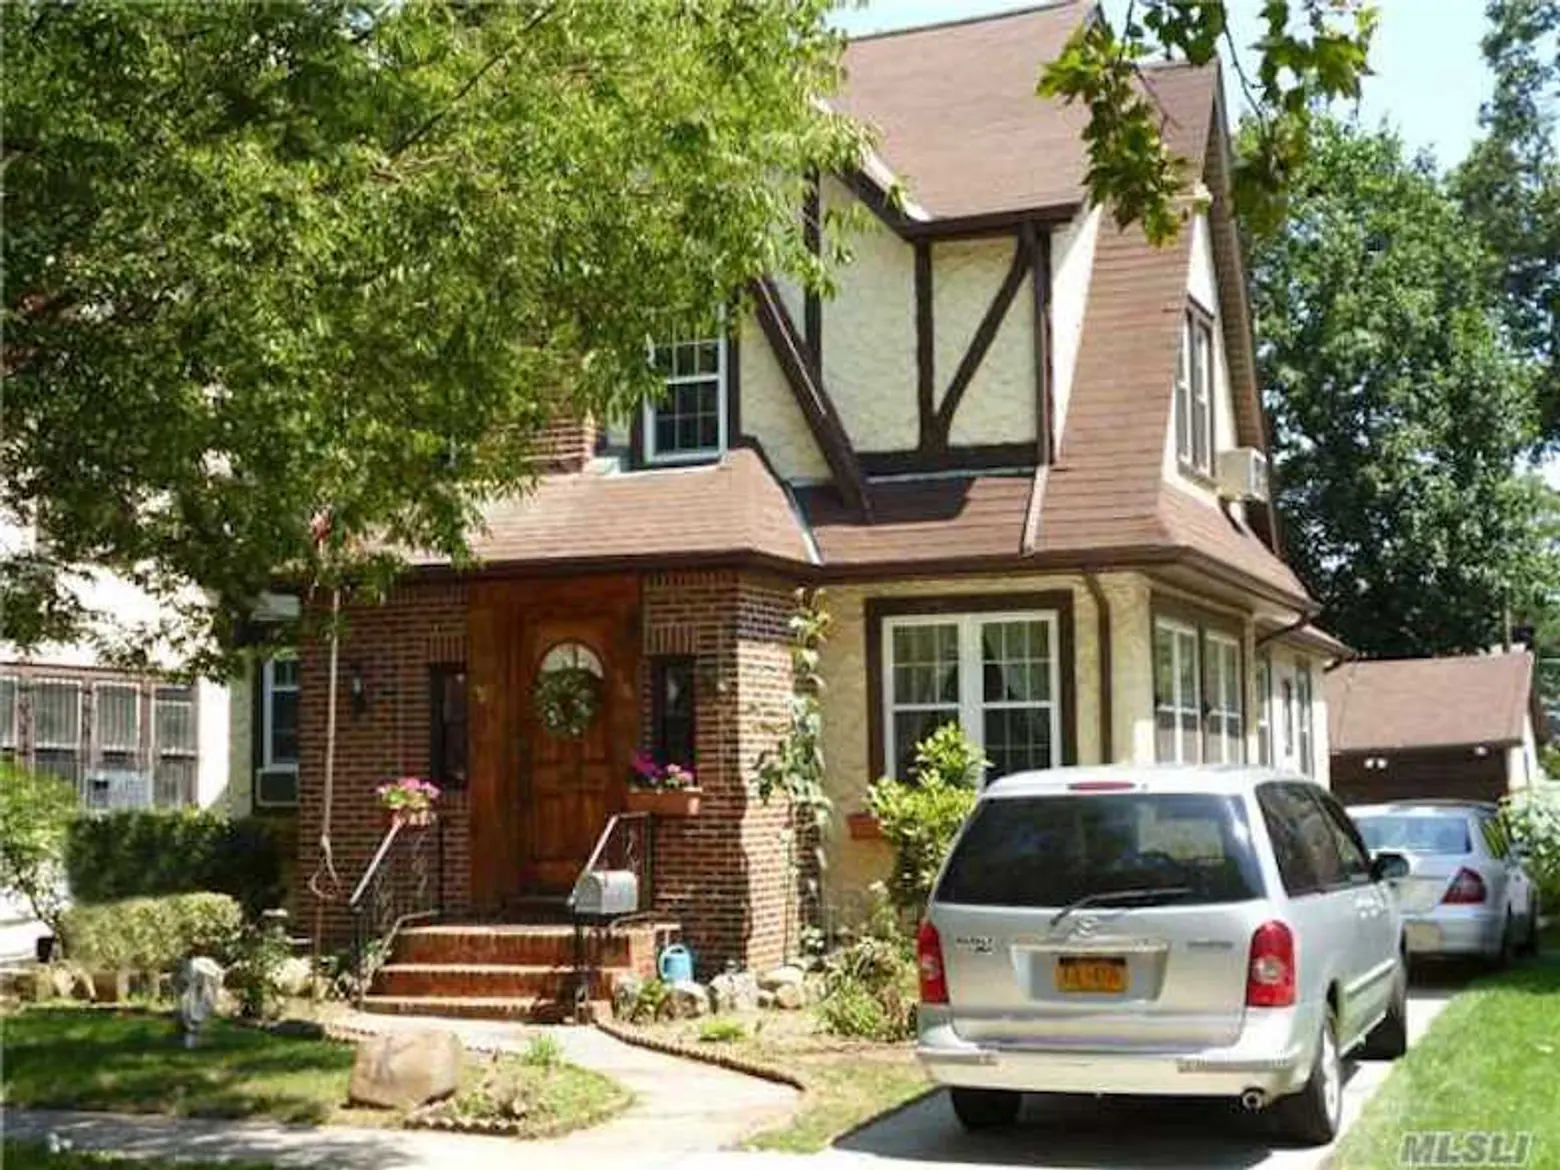 Donald Trump’s childhood home in Queens is renting for $725/night on Airbnb